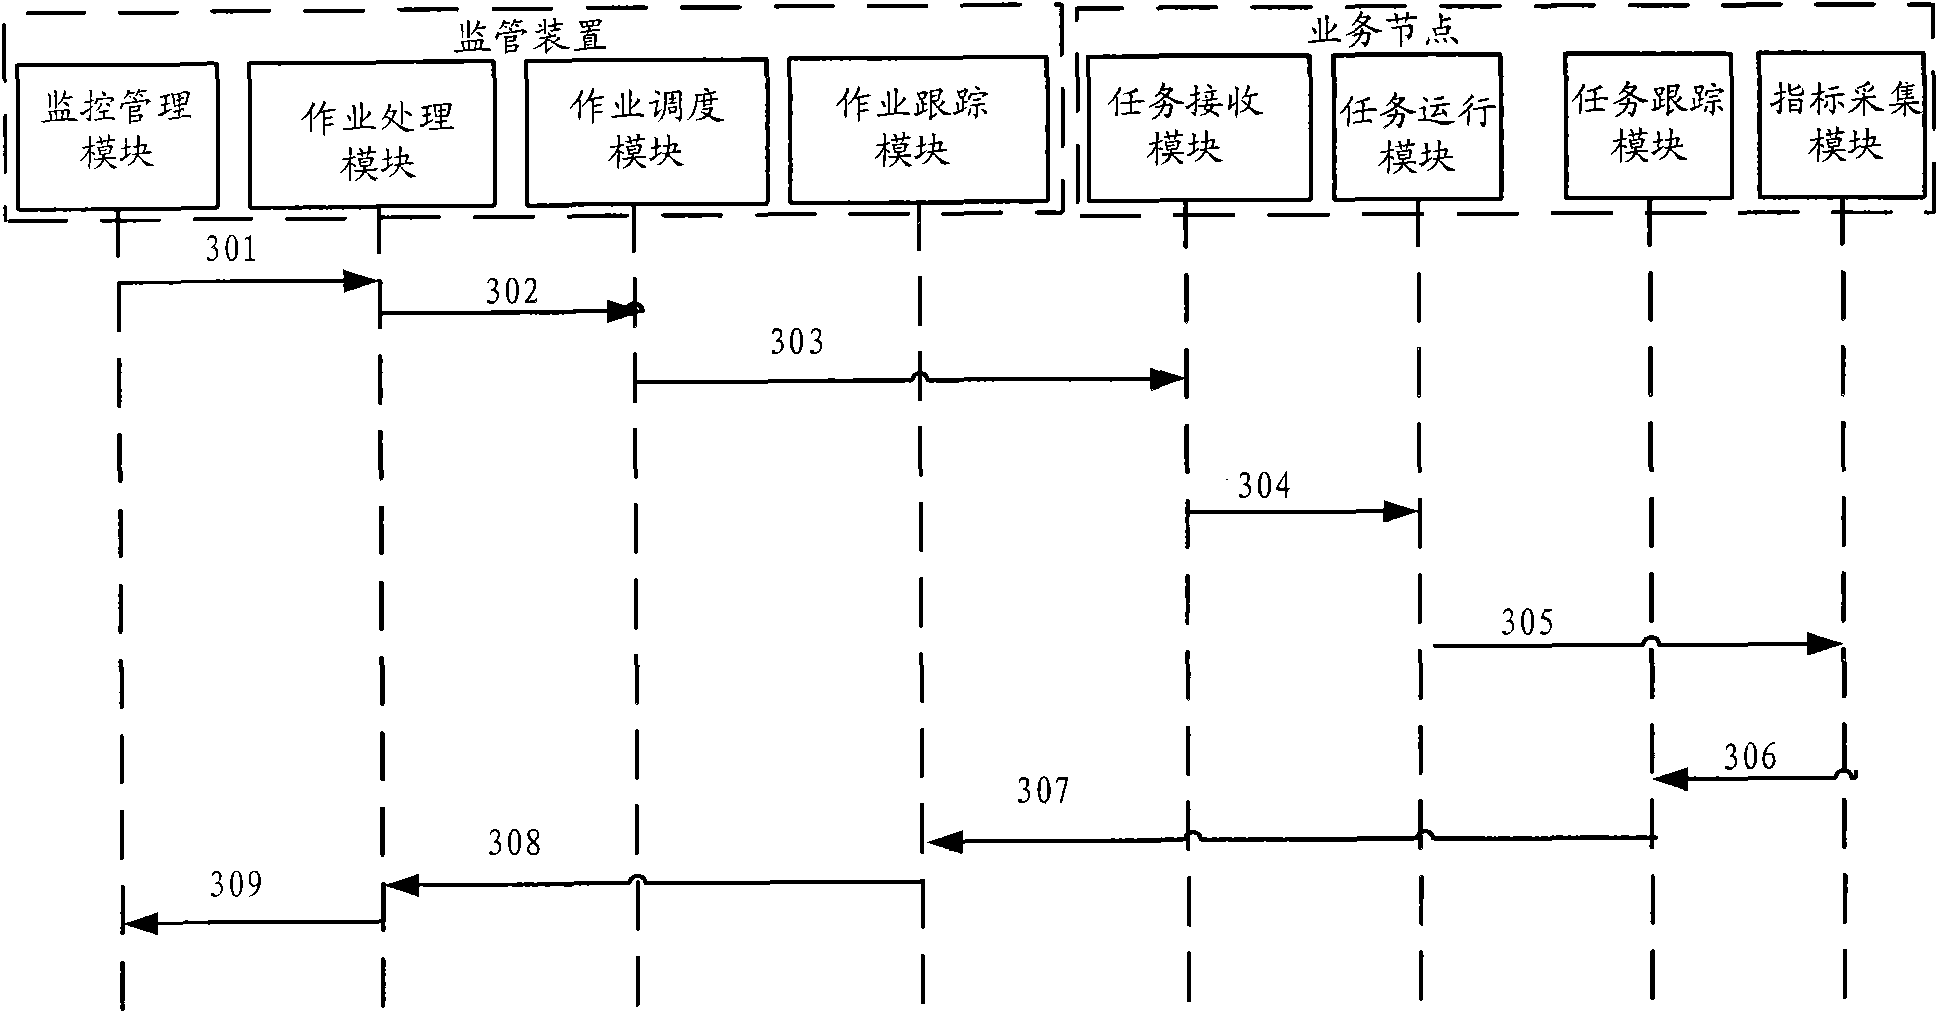 Network equipment supervision method and system